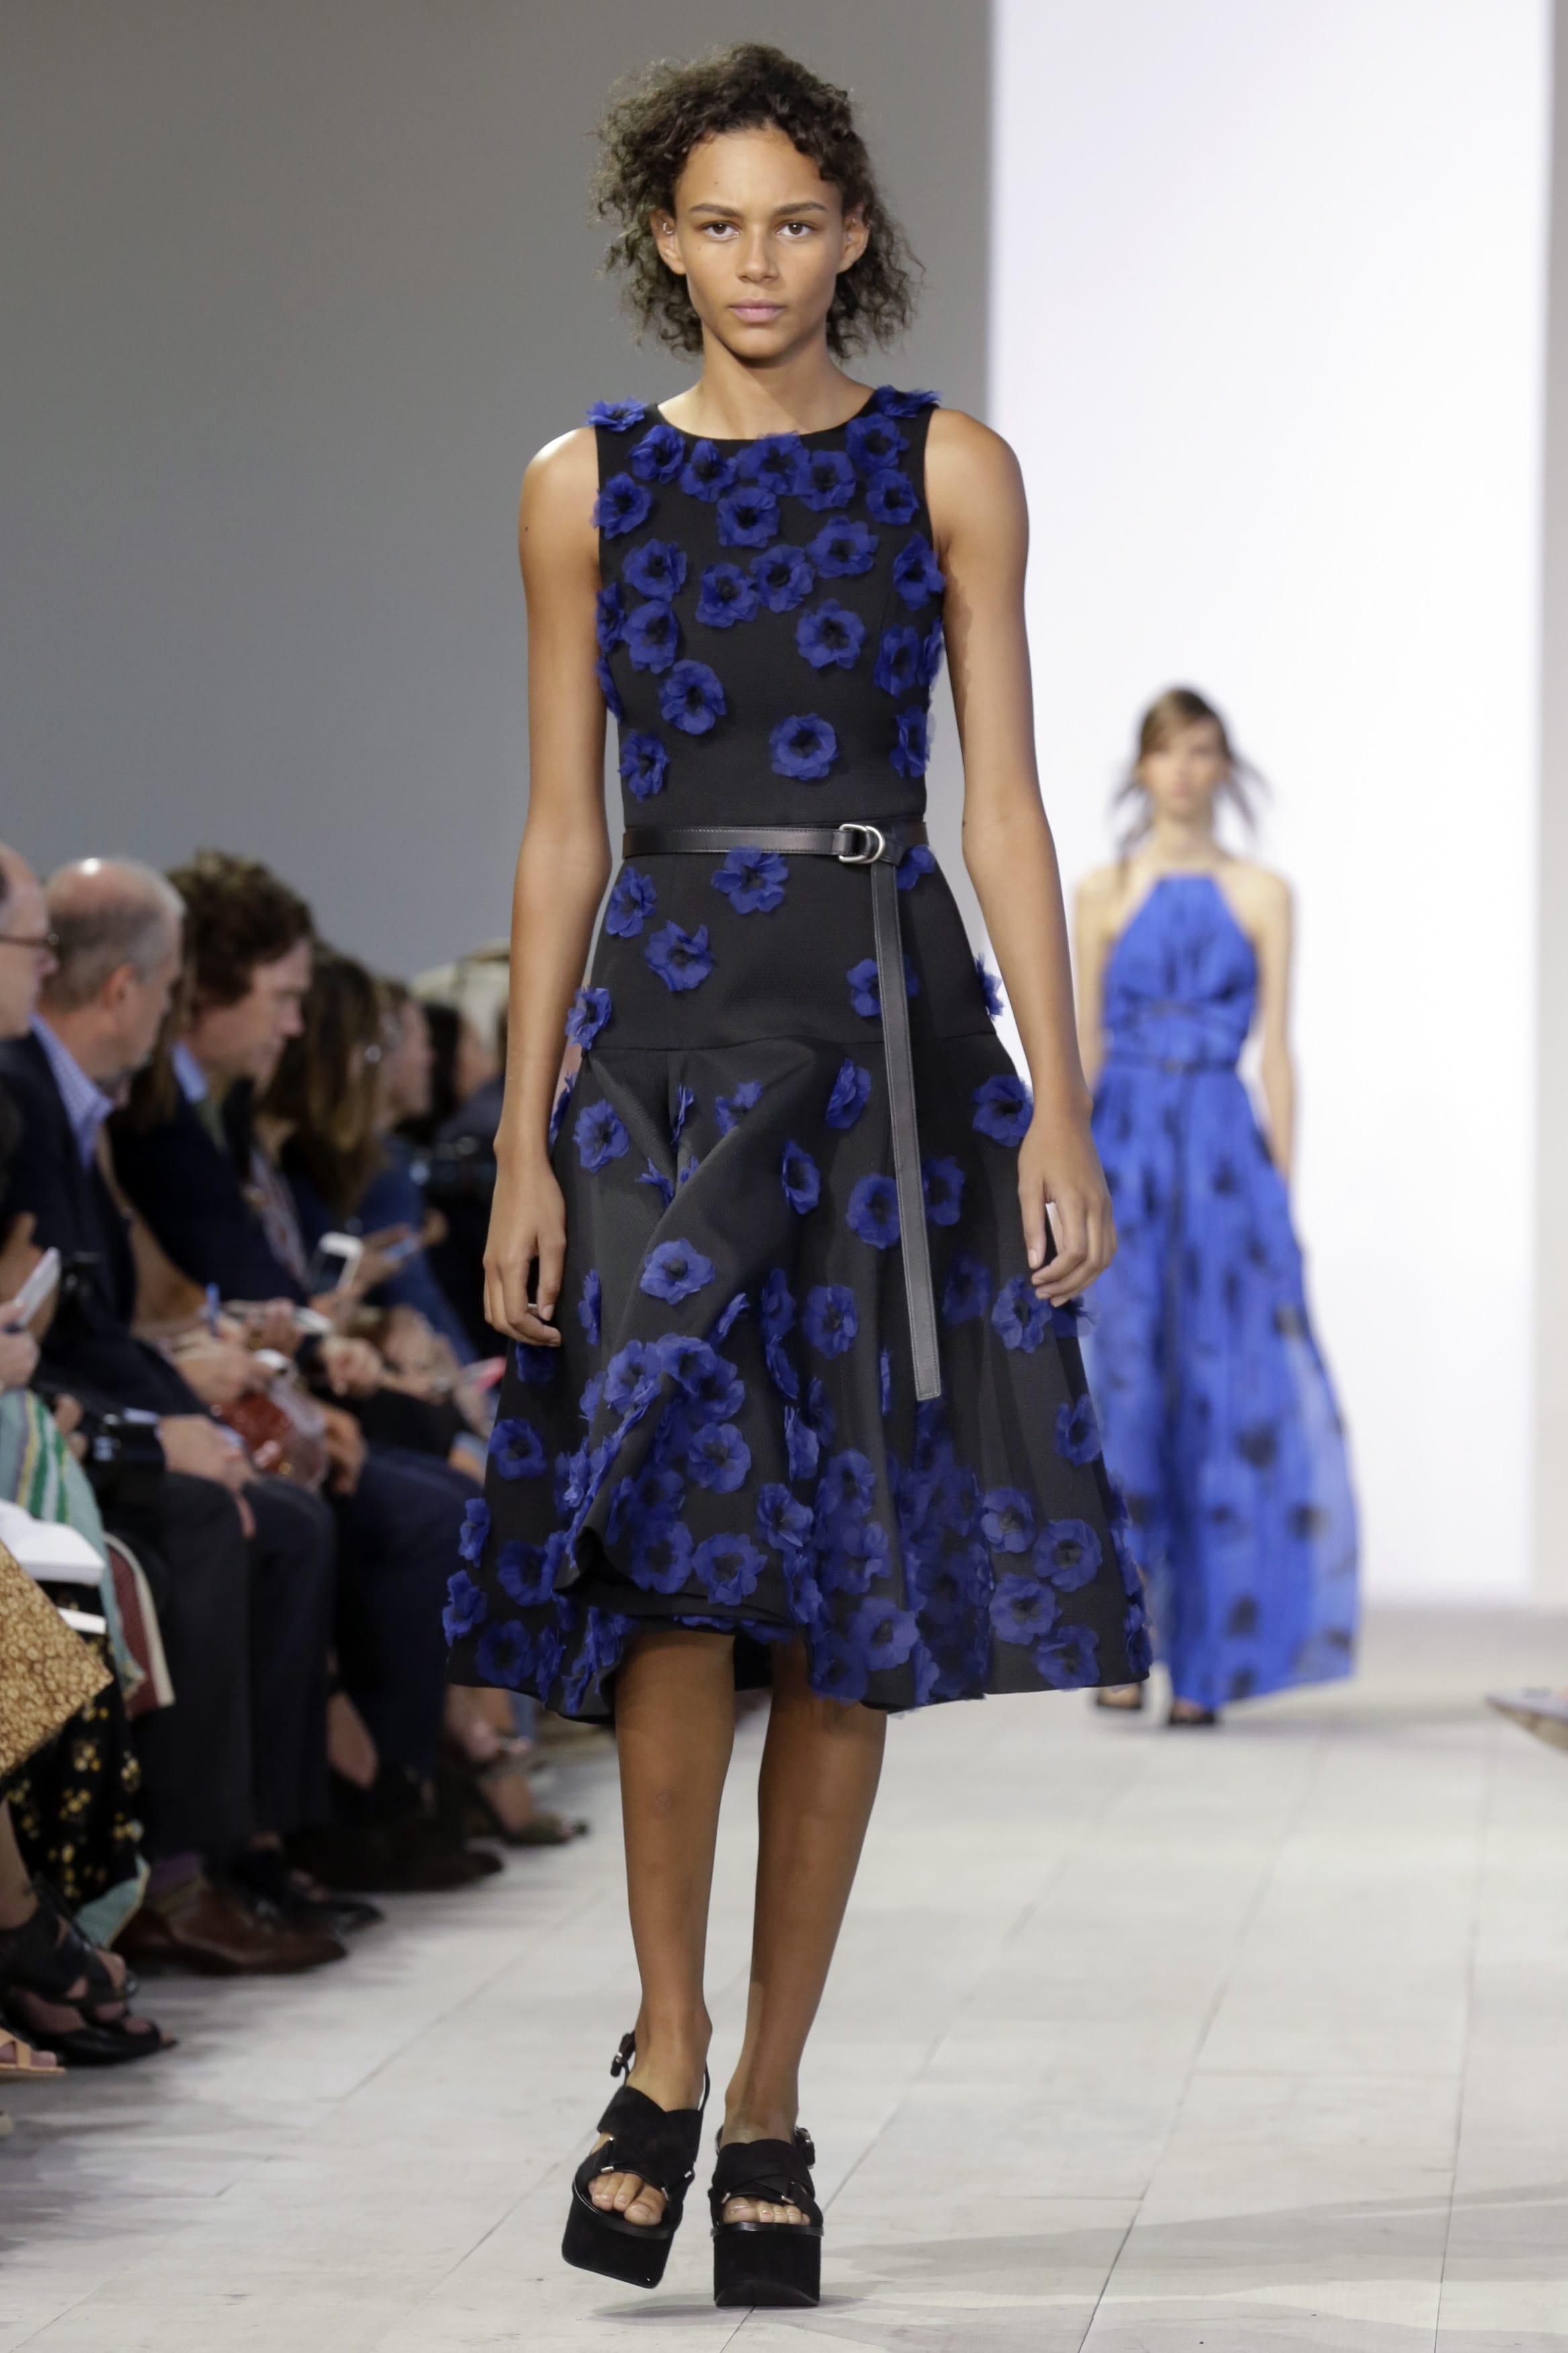 The Michael Kors Spring 2016 collection is modeled during Fashion Week in New York on  Sept. 16.